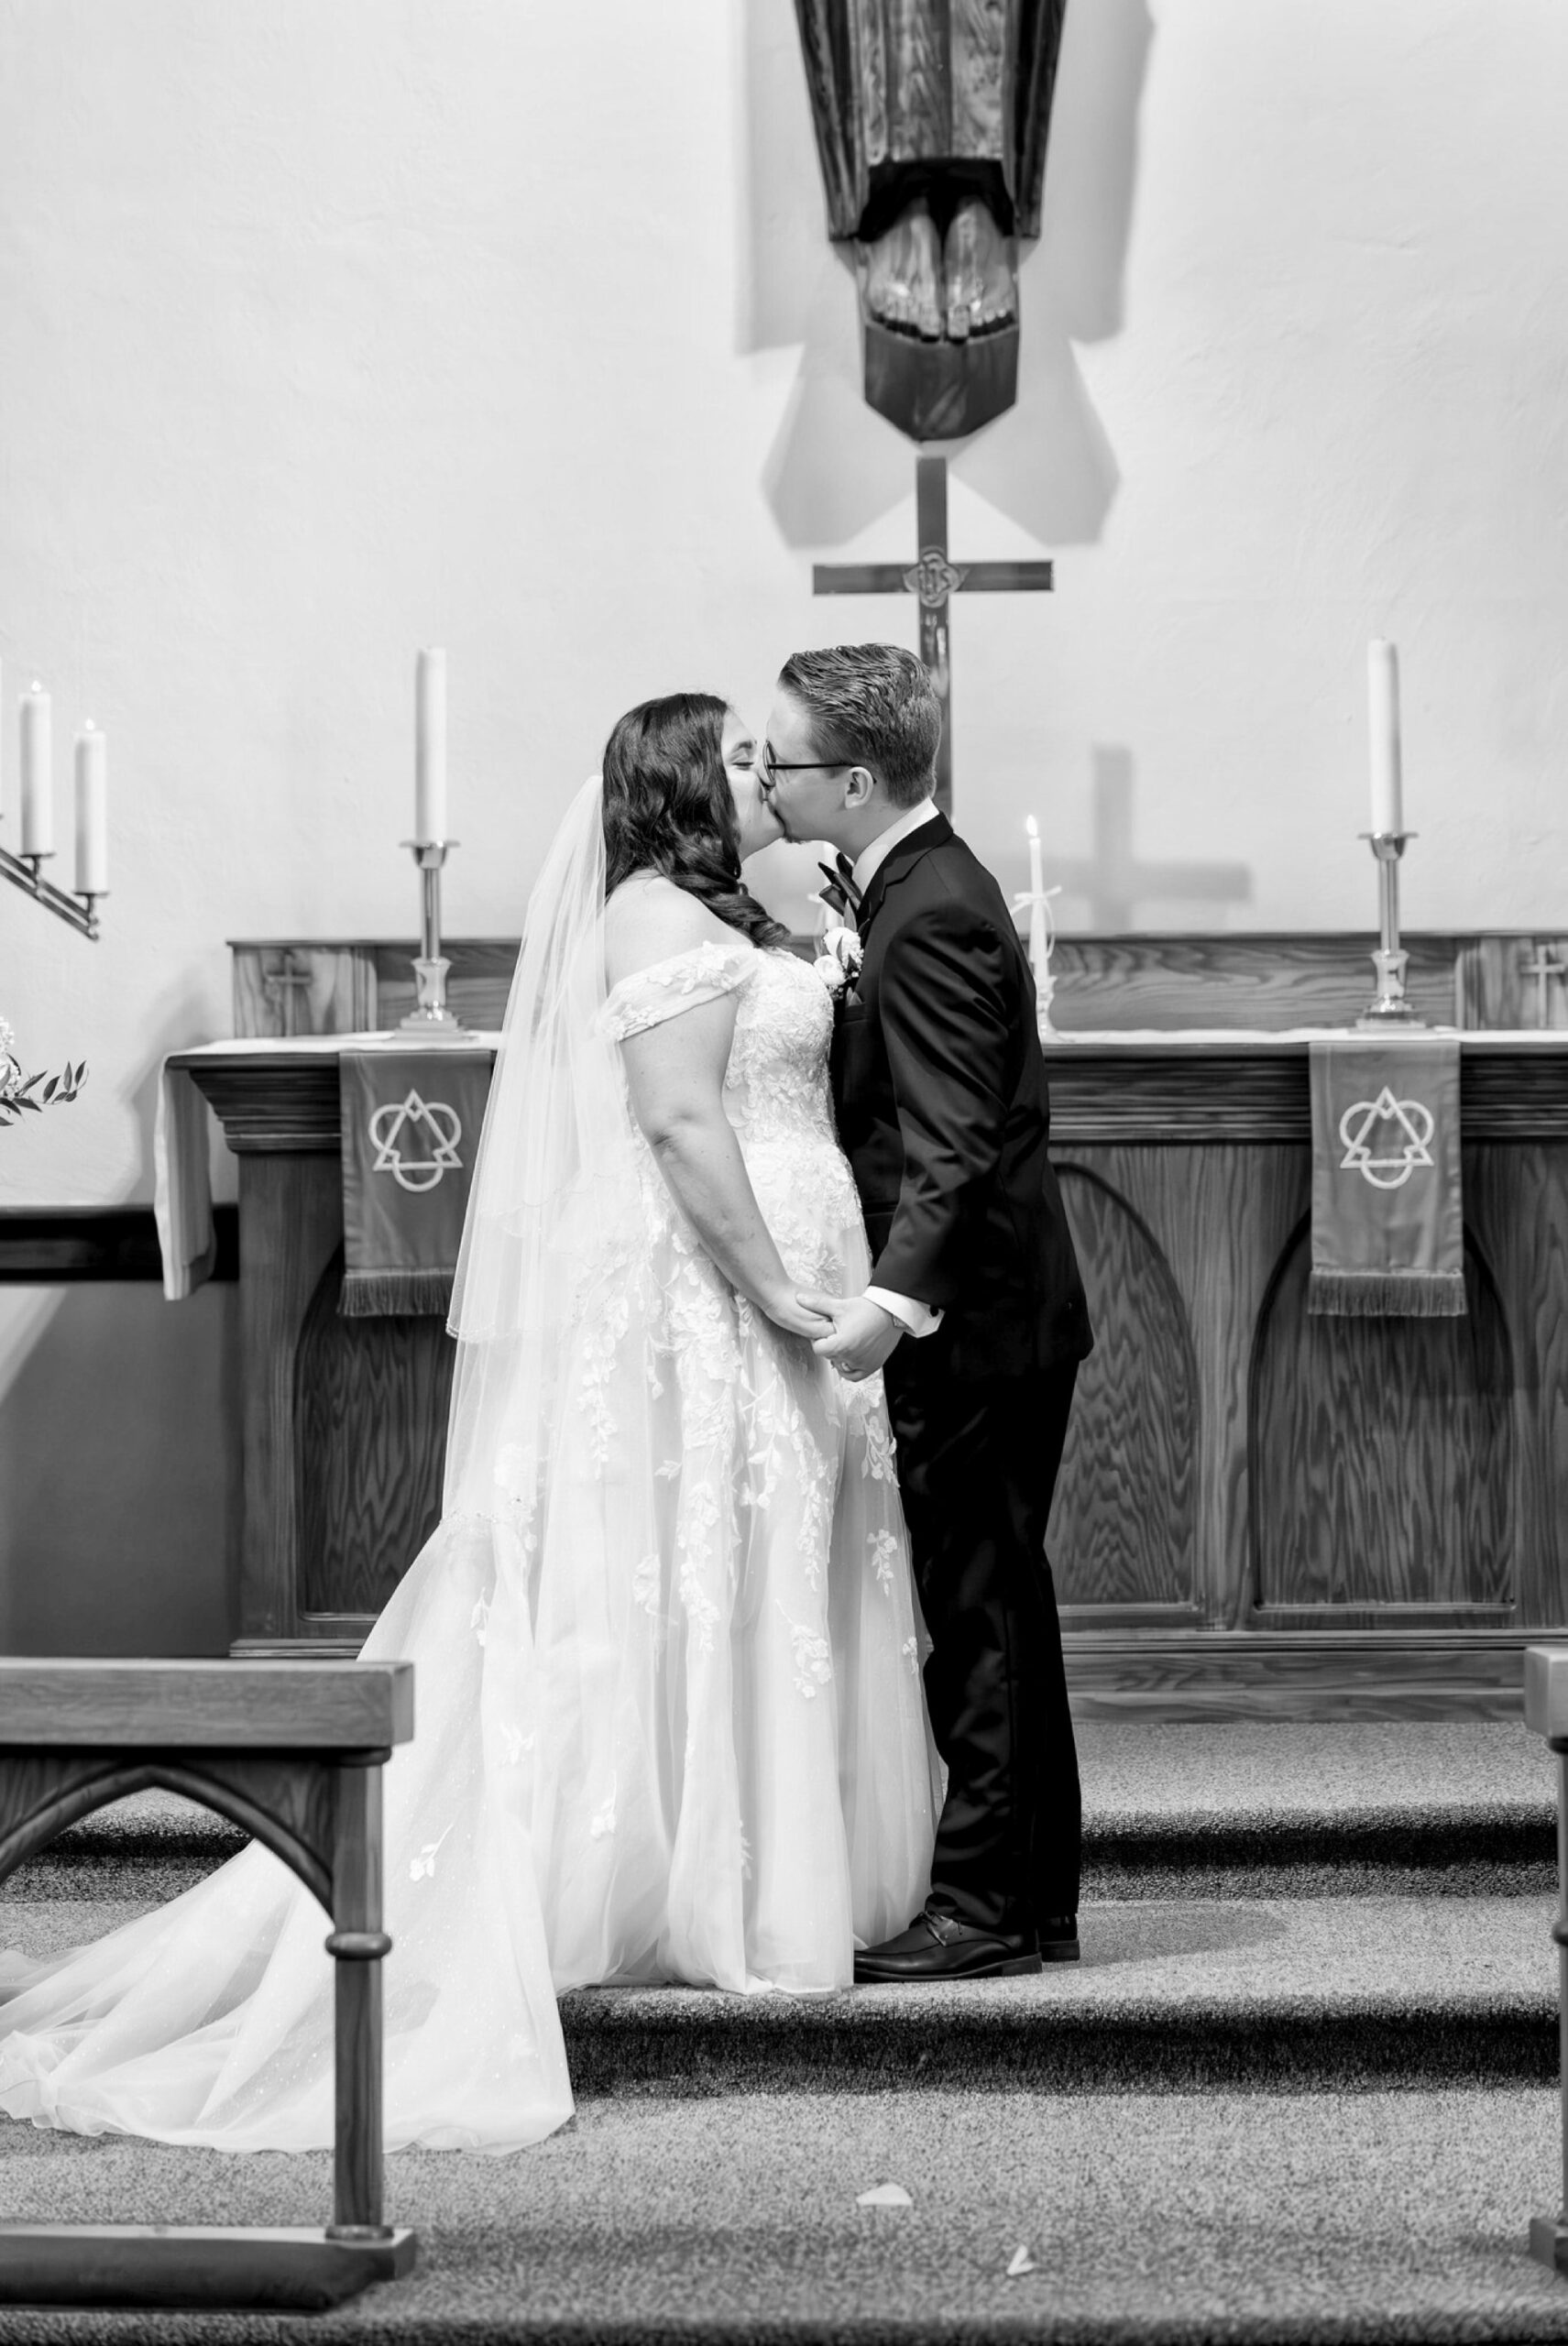 The bride and groom kiss at the altar on their wedding day at Immanuel Lutheran Church in Macomb, MI. 